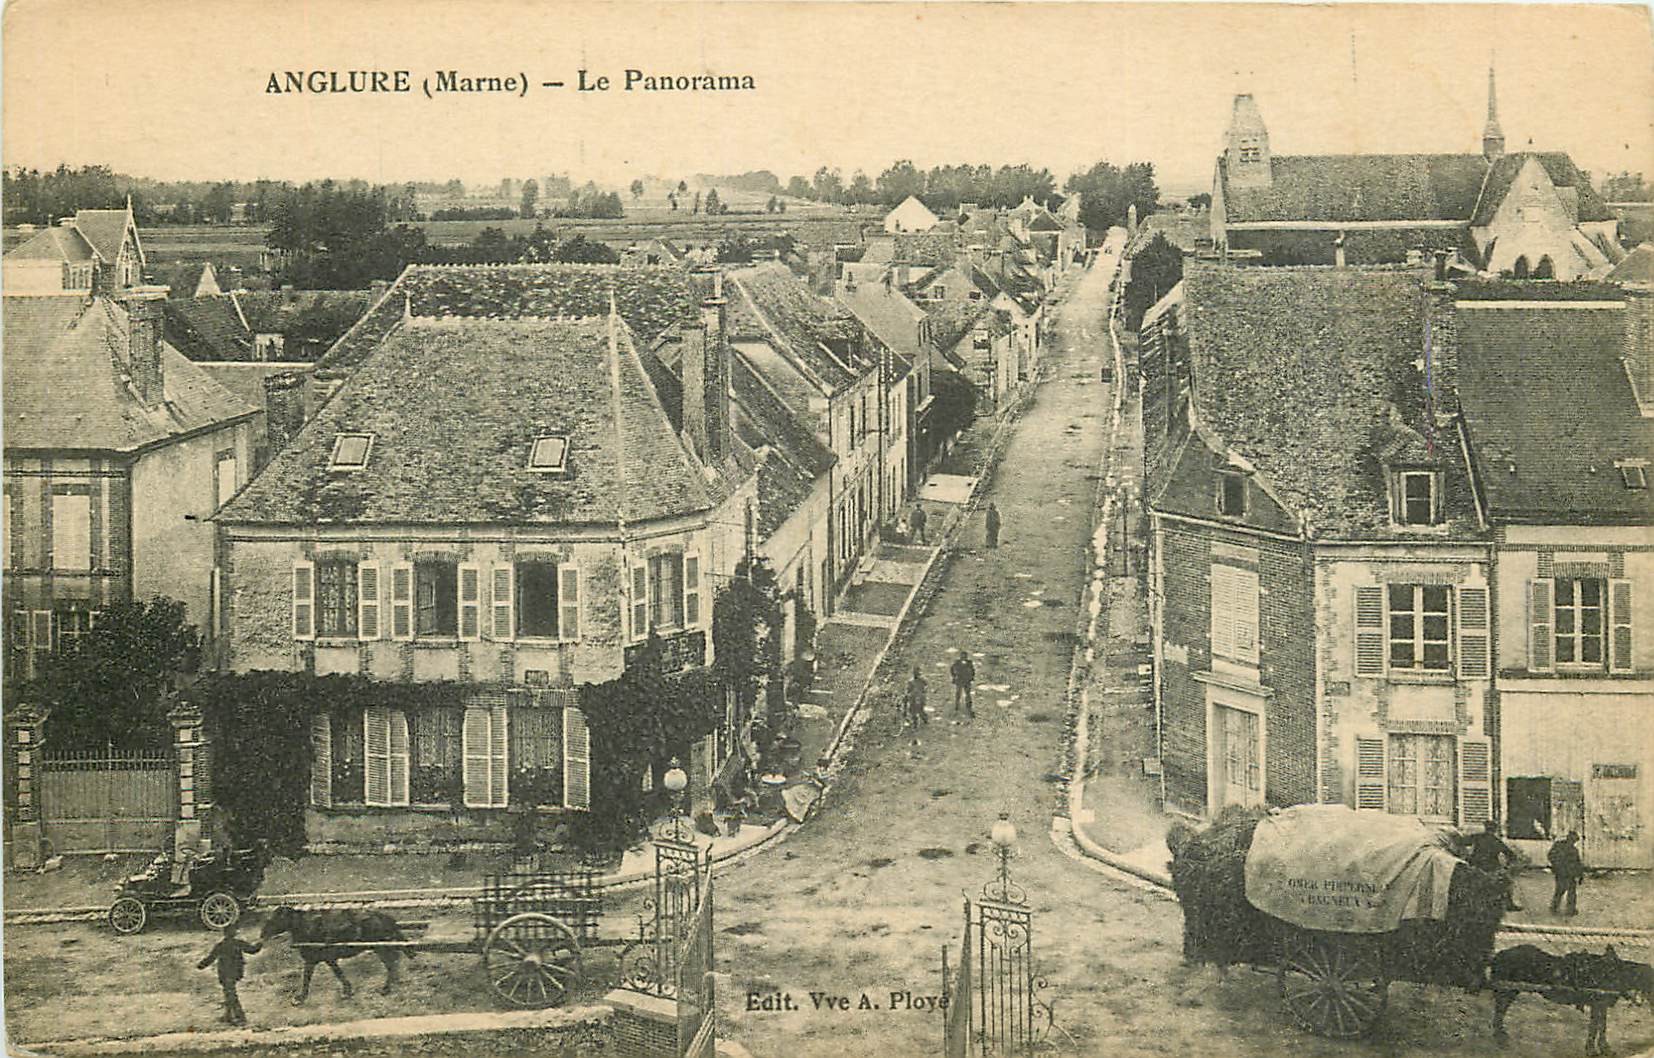 51 ANGLURE. Panorama attelages et voiture tacot